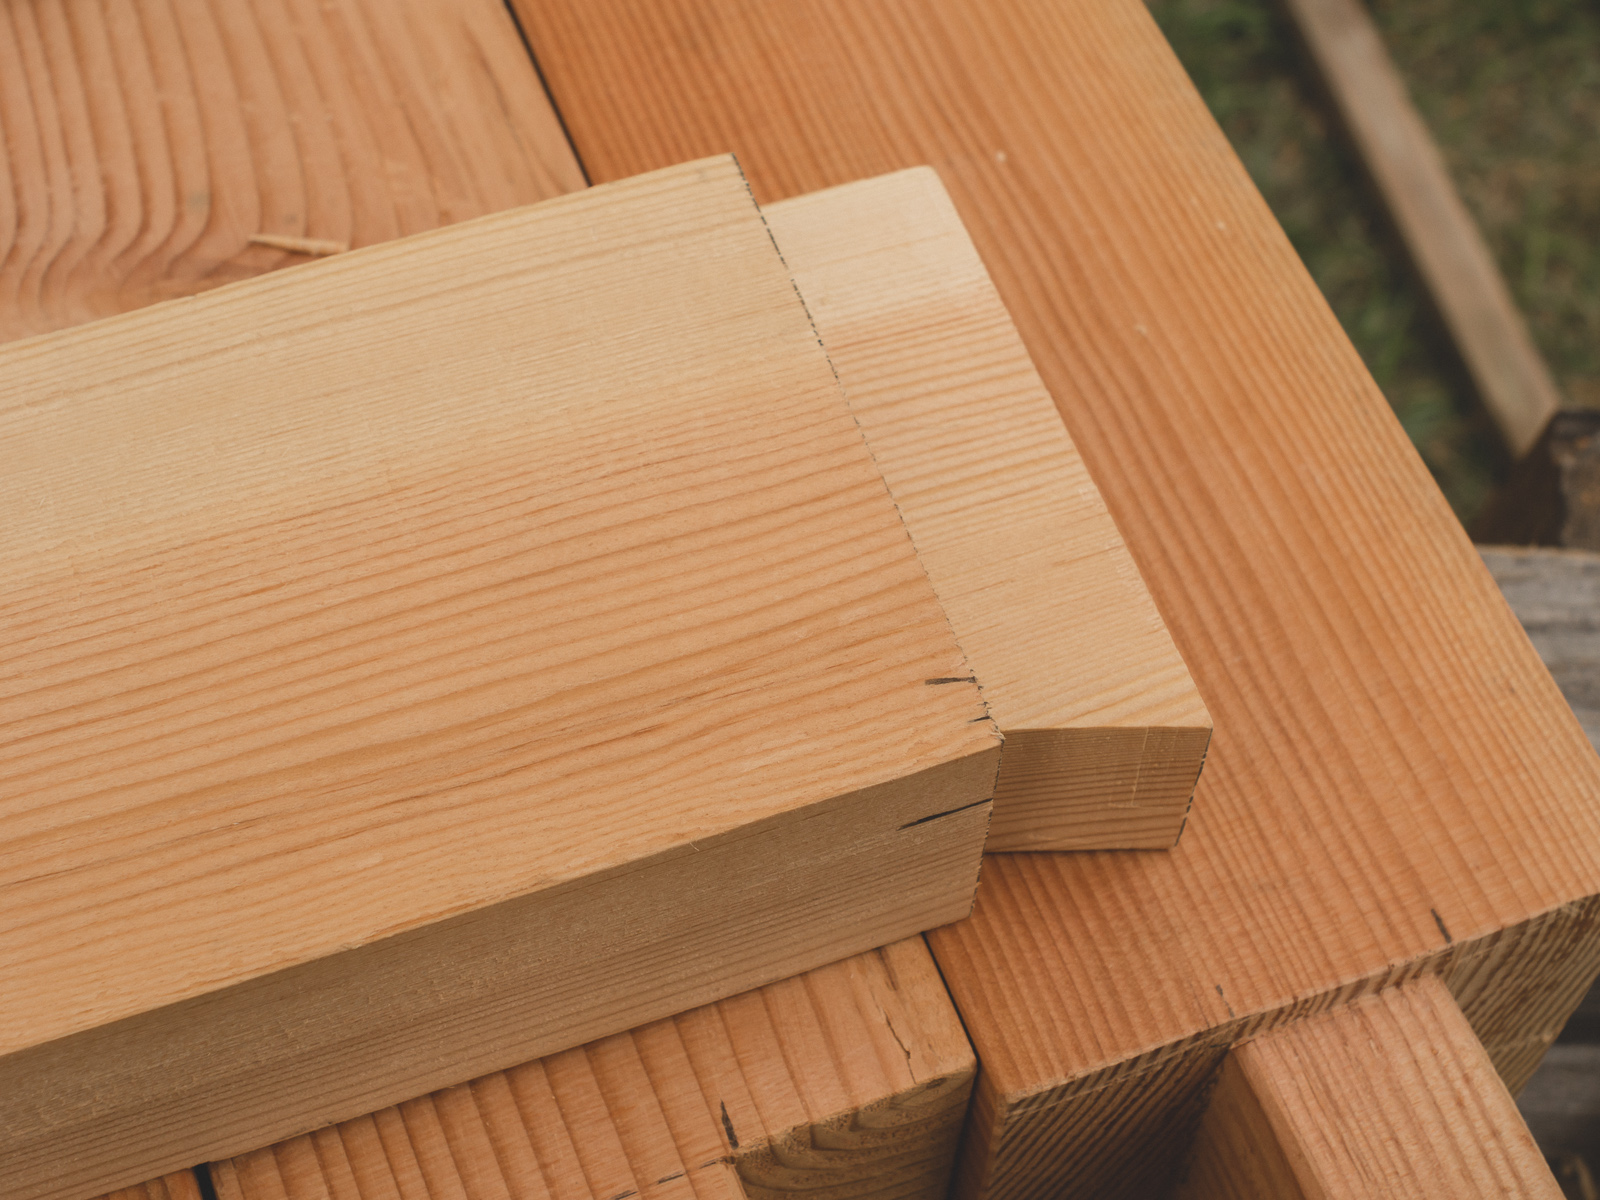 Simple Japanese structural joinery